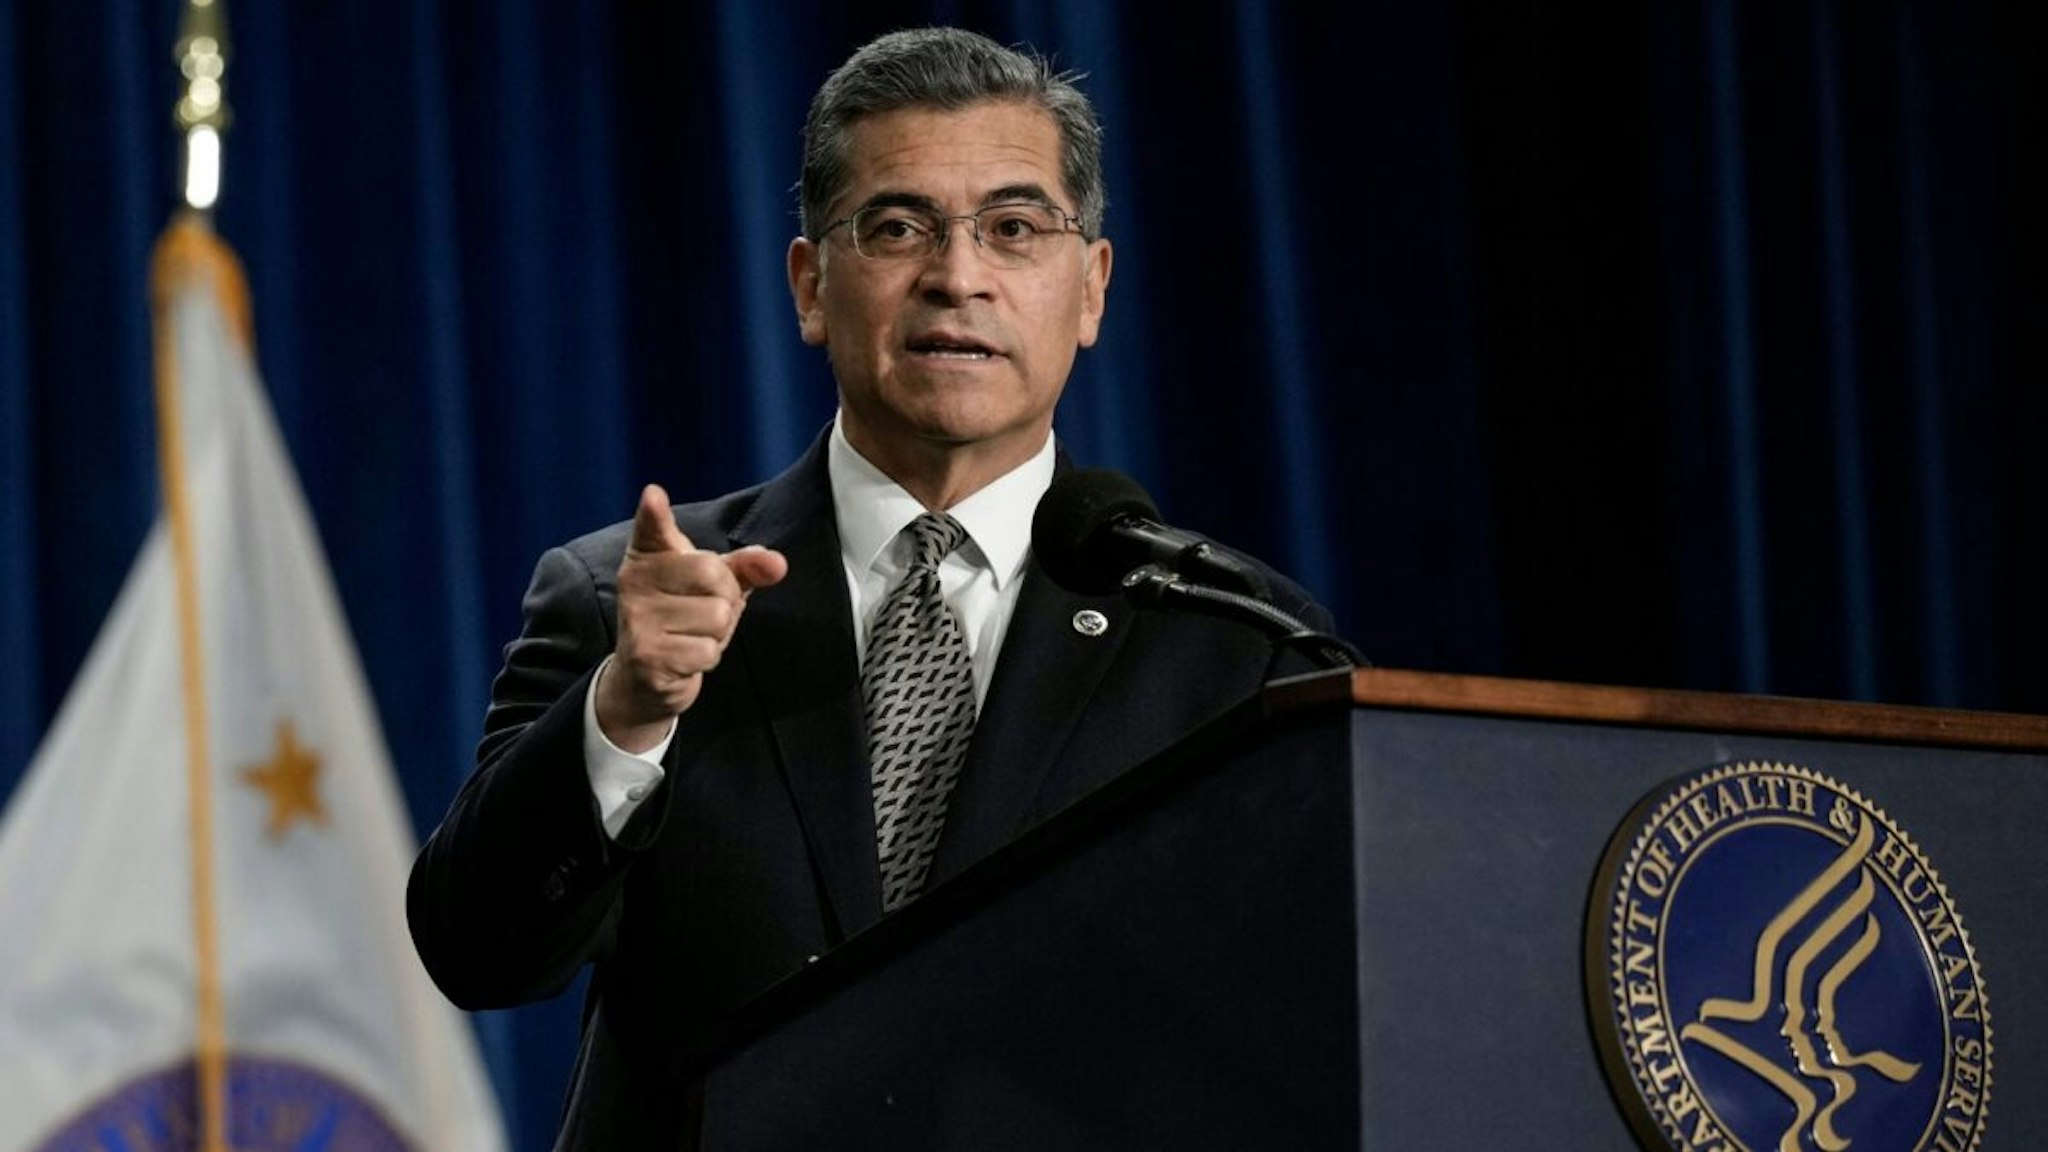 WASHINGTON, DC - MARCH 9: Secretary of the Department of Health and Human Services Xavier Becerra speaks during a news conference at HHS headquarters March 9, 2023 in Washington, DC.